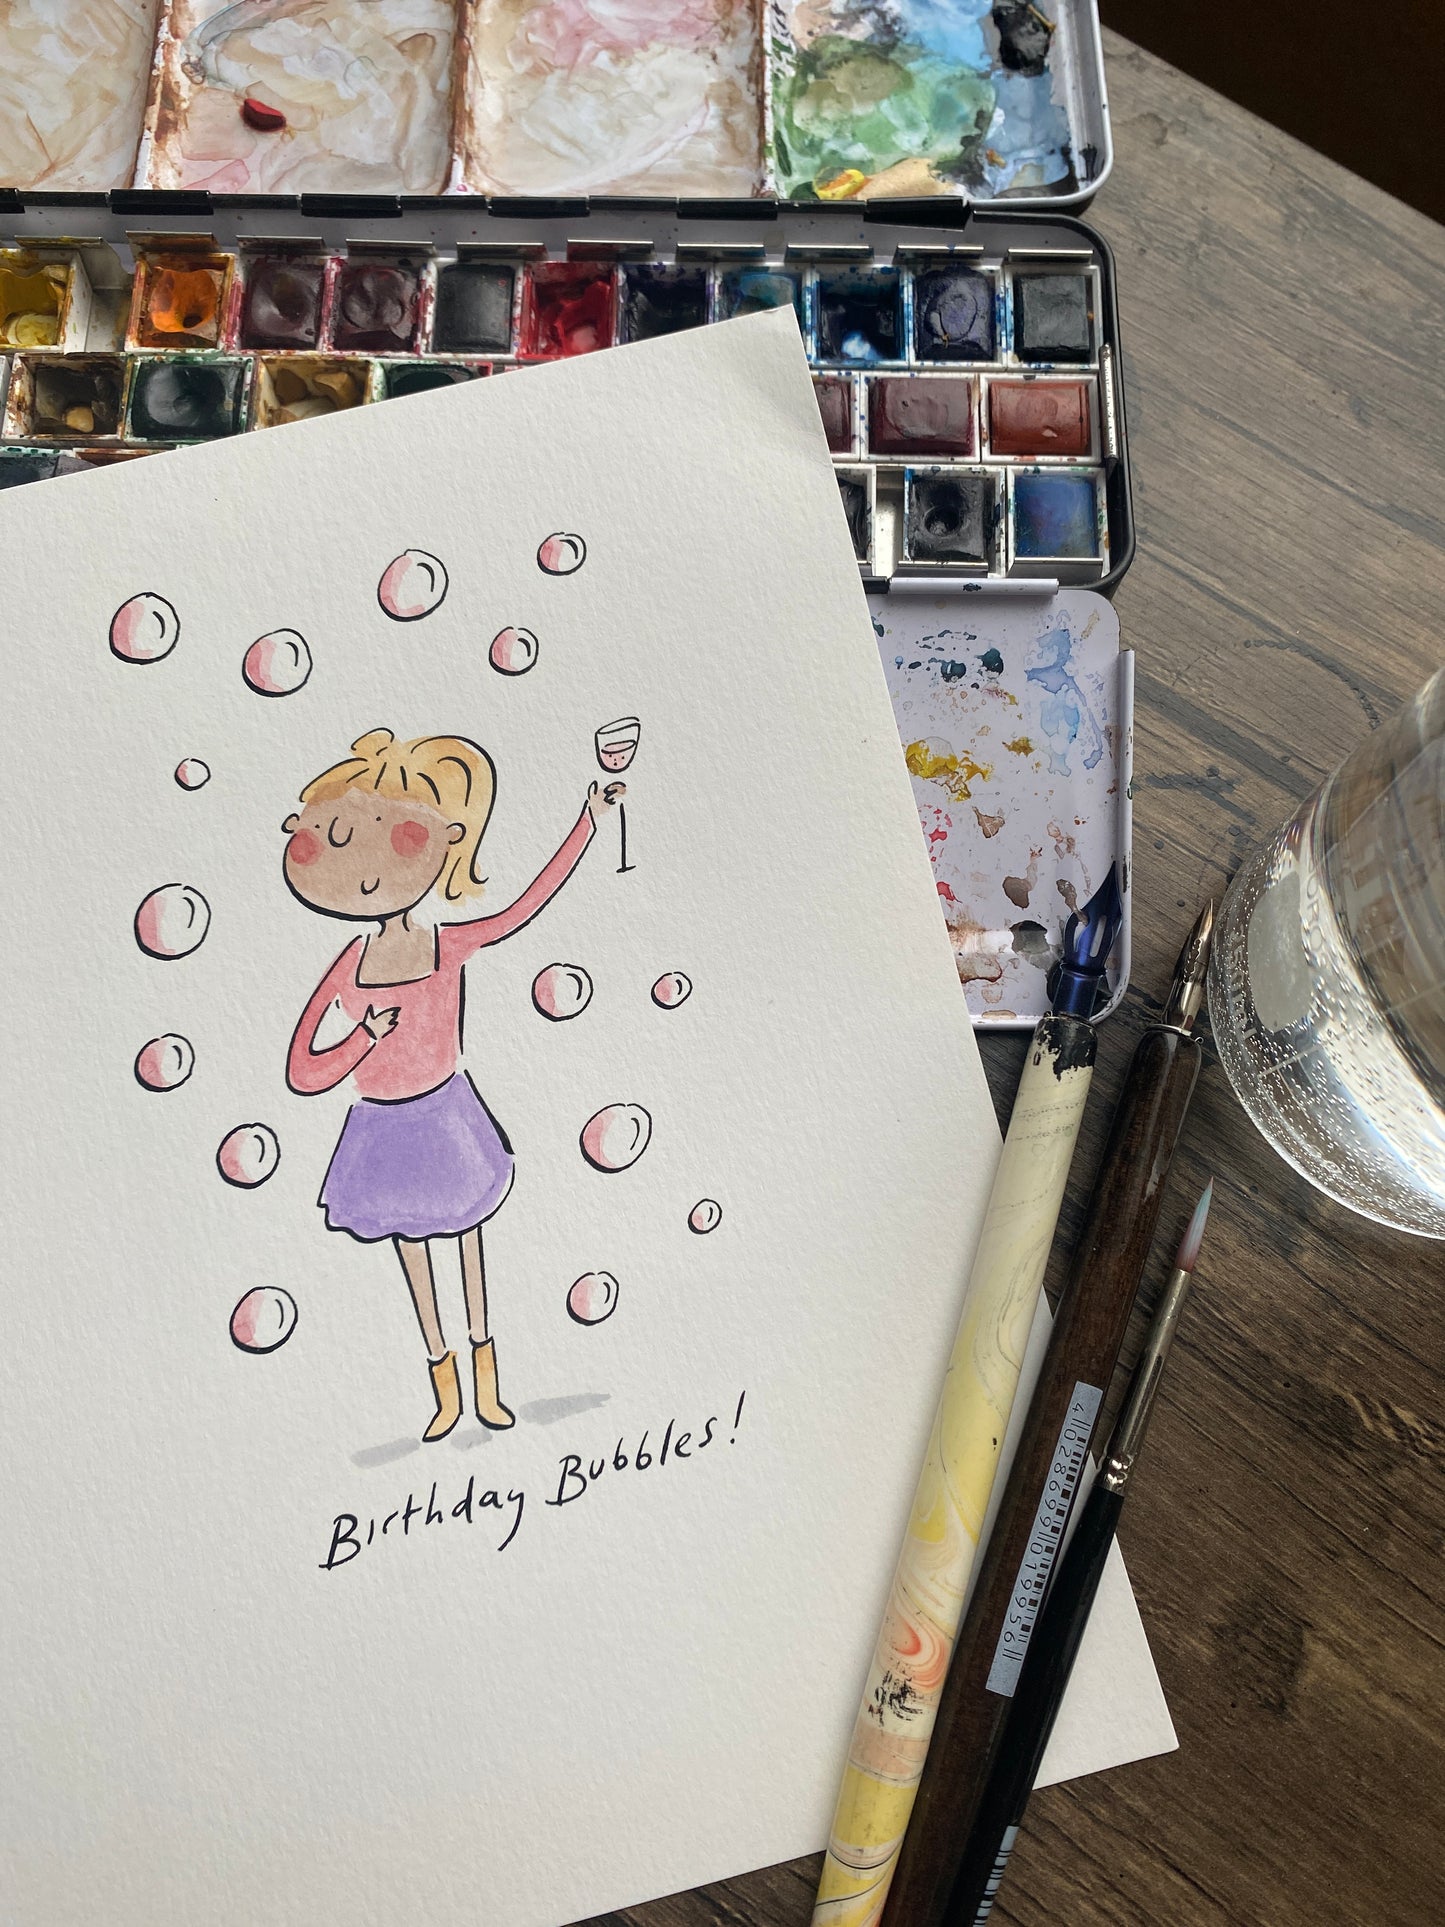 Birthday Bubbles original pen and ink and watercolour illustration by Rosie Brooks